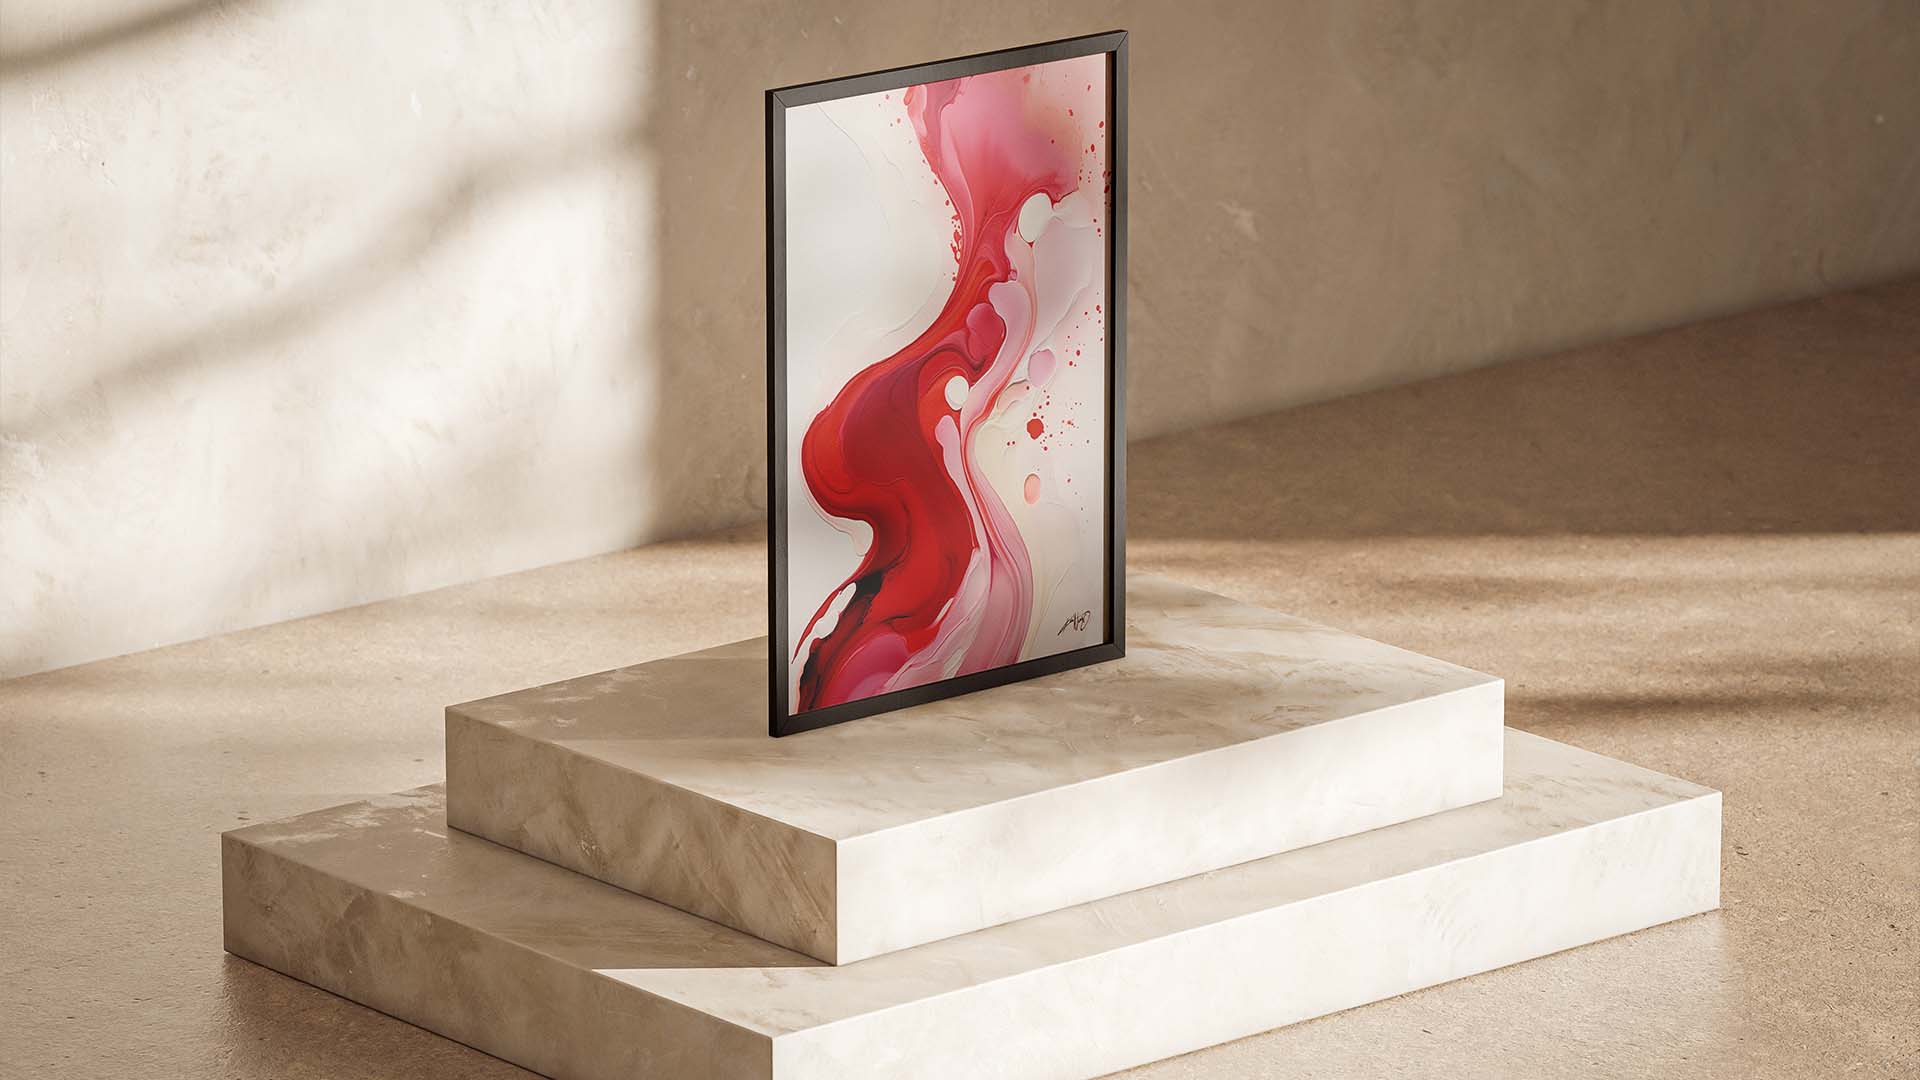 Red and pink abstract painting of fluids in a black frame, standing on concrete stairs.